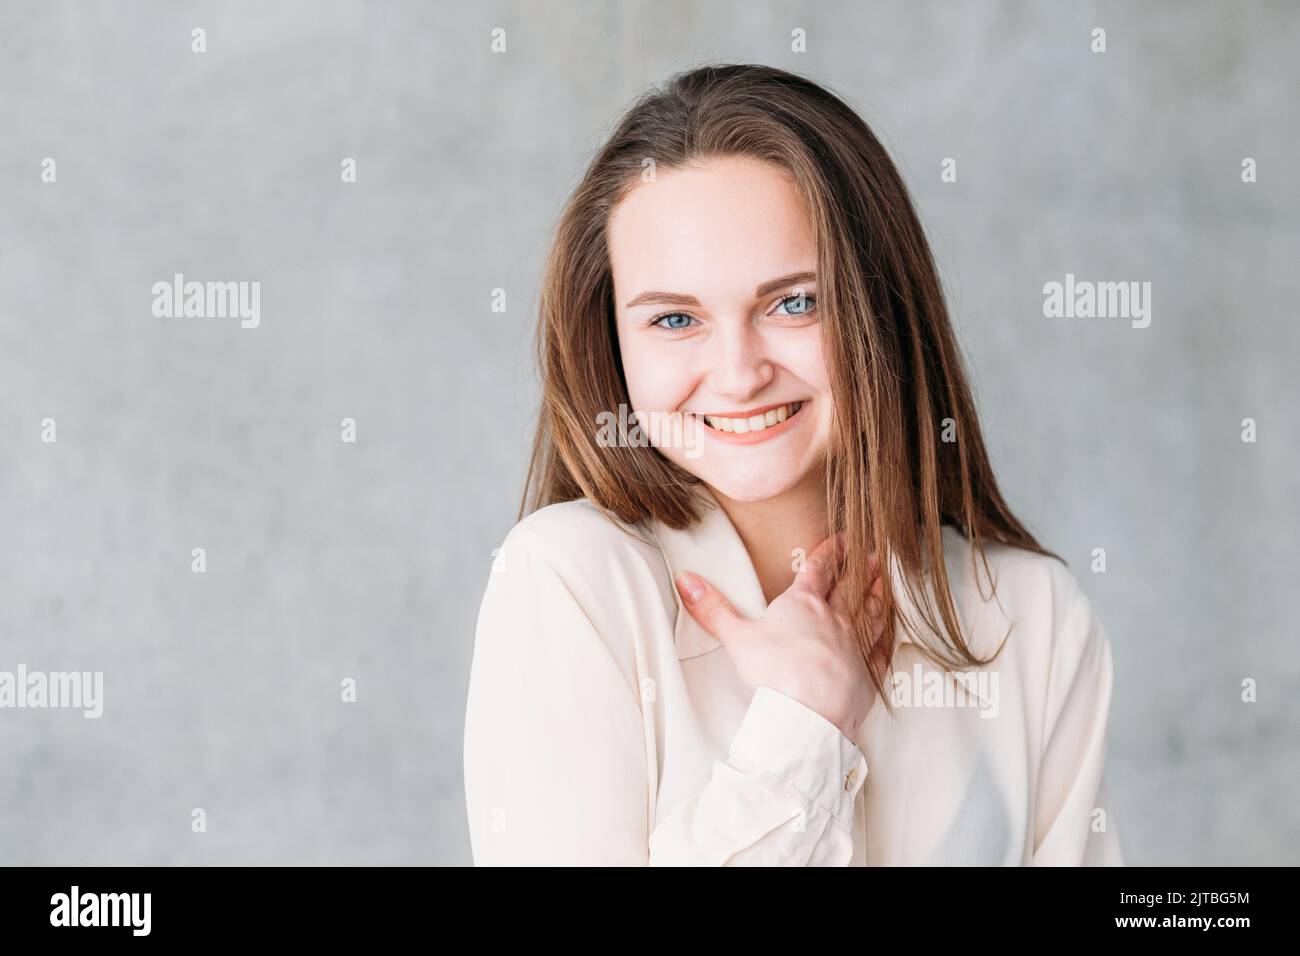 young woman portrait shy compliment copy space Stock Photo